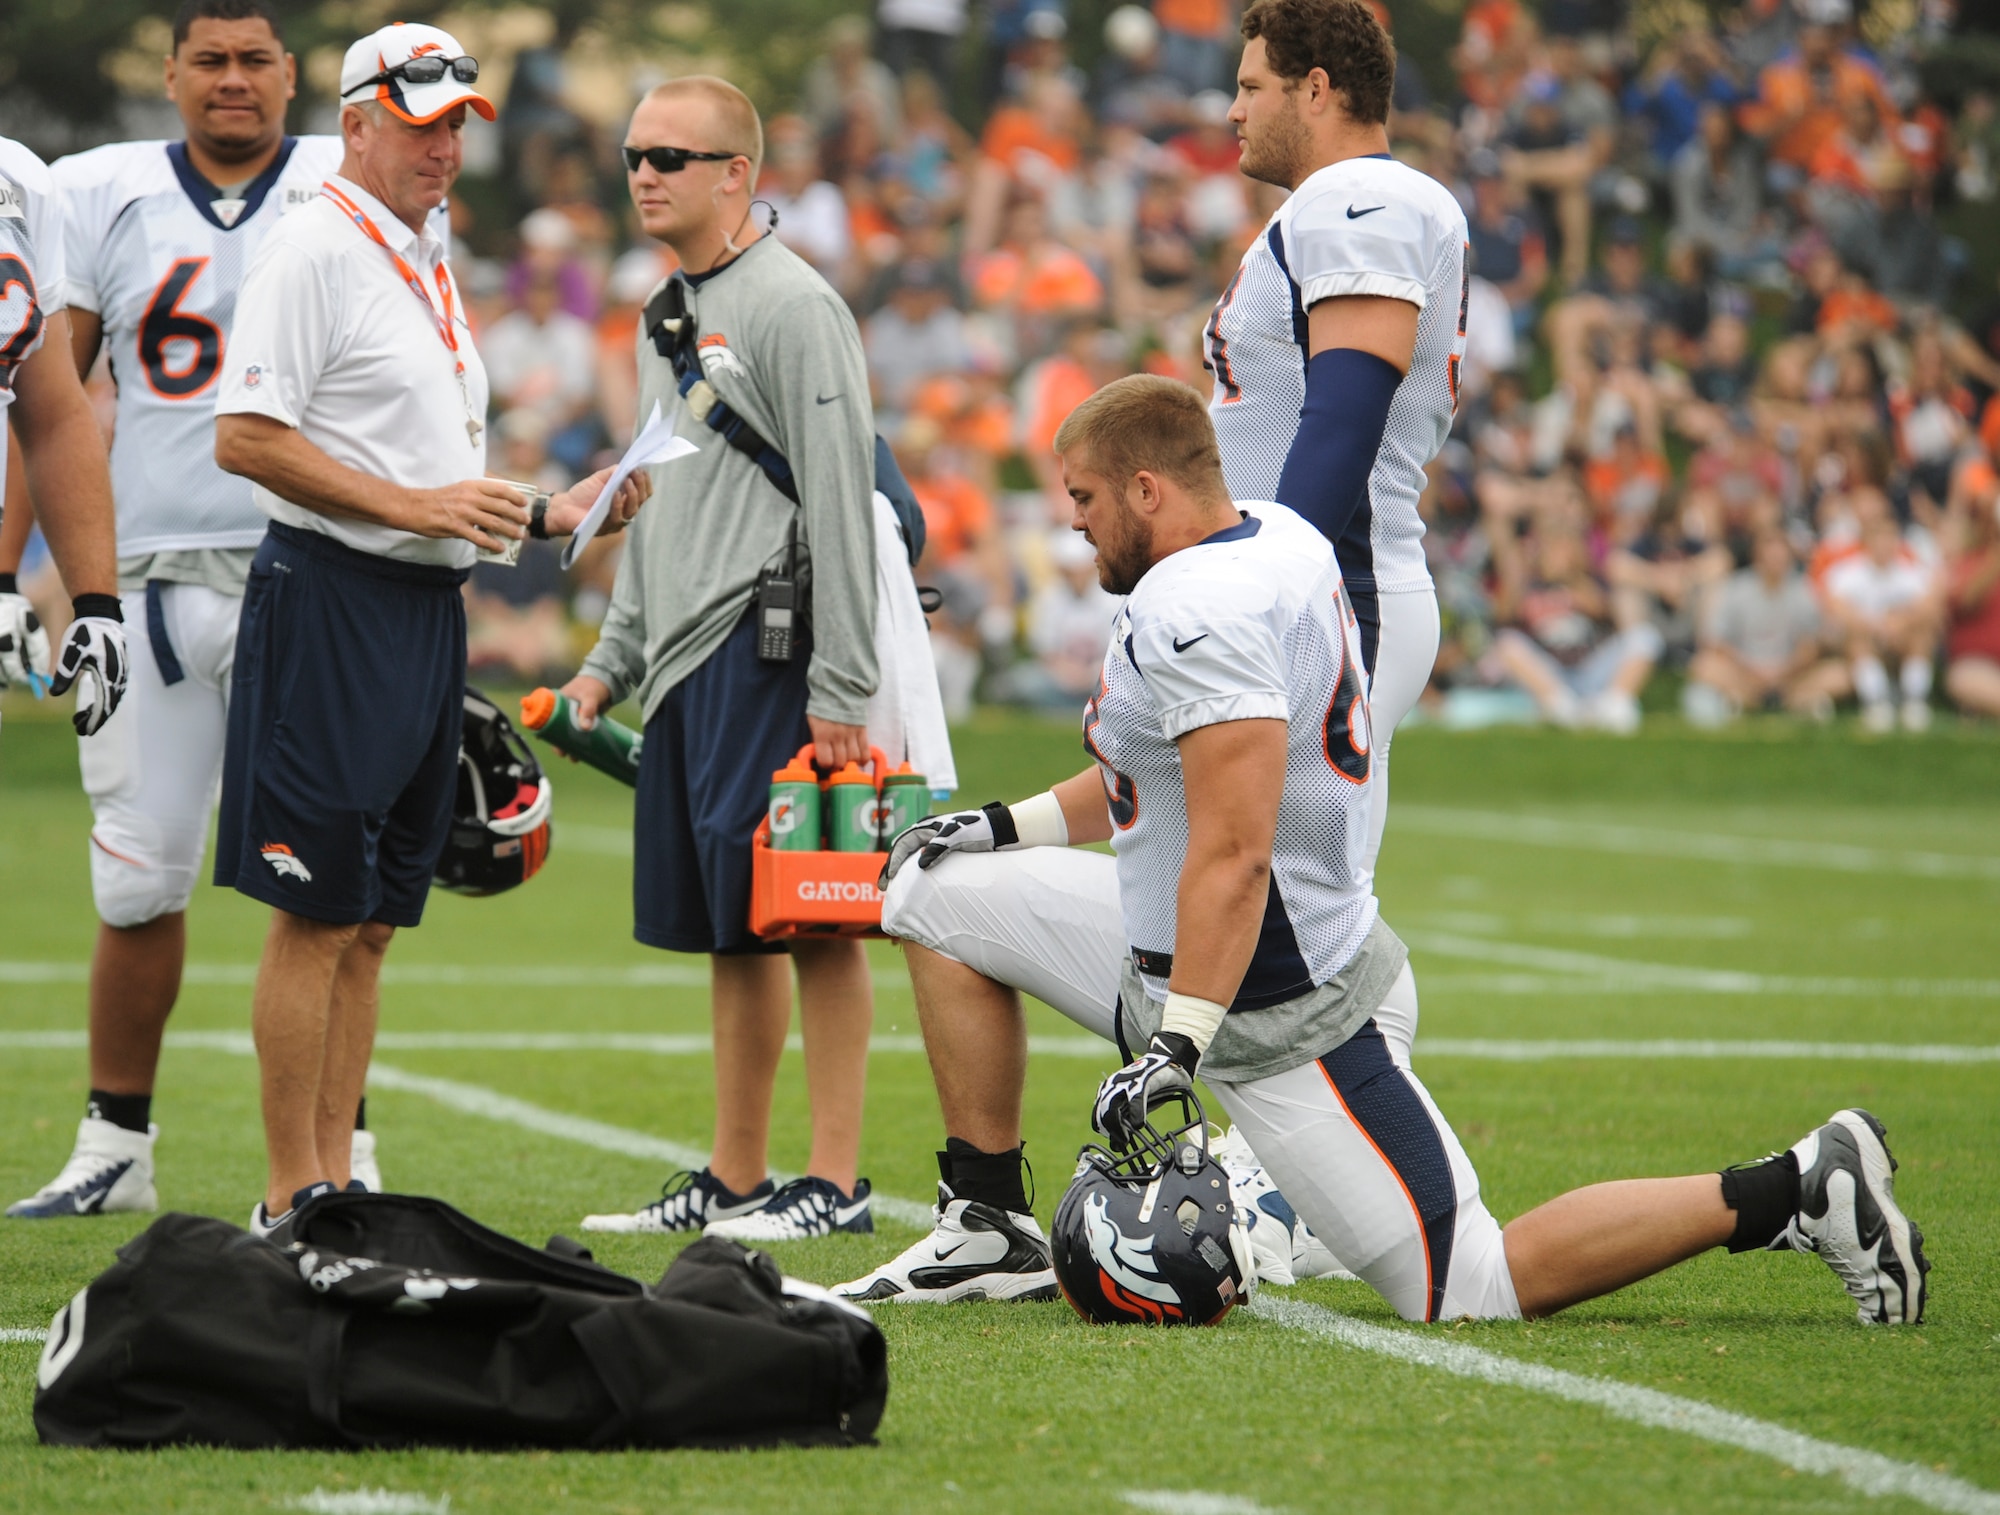 Ben Garland, Denver Broncos offensive guard, kneeling, listens to head coach John Fox before a Broncos training camp practice July 29, 2013, at the Broncos training facility in Englewood, Colo. Garland spent the 2012 season on the Broncos practice squad and transitioned from defensive tackle to offensive guard before the Broncos 2013 mini-camp. Garland is also a public affairs officer with the 140th Wing, Colorado Air National Guard, and served his annual commitment during the early part of 2013. (U.S. Air Force photo/Staff Sgt. Christopher Gross)